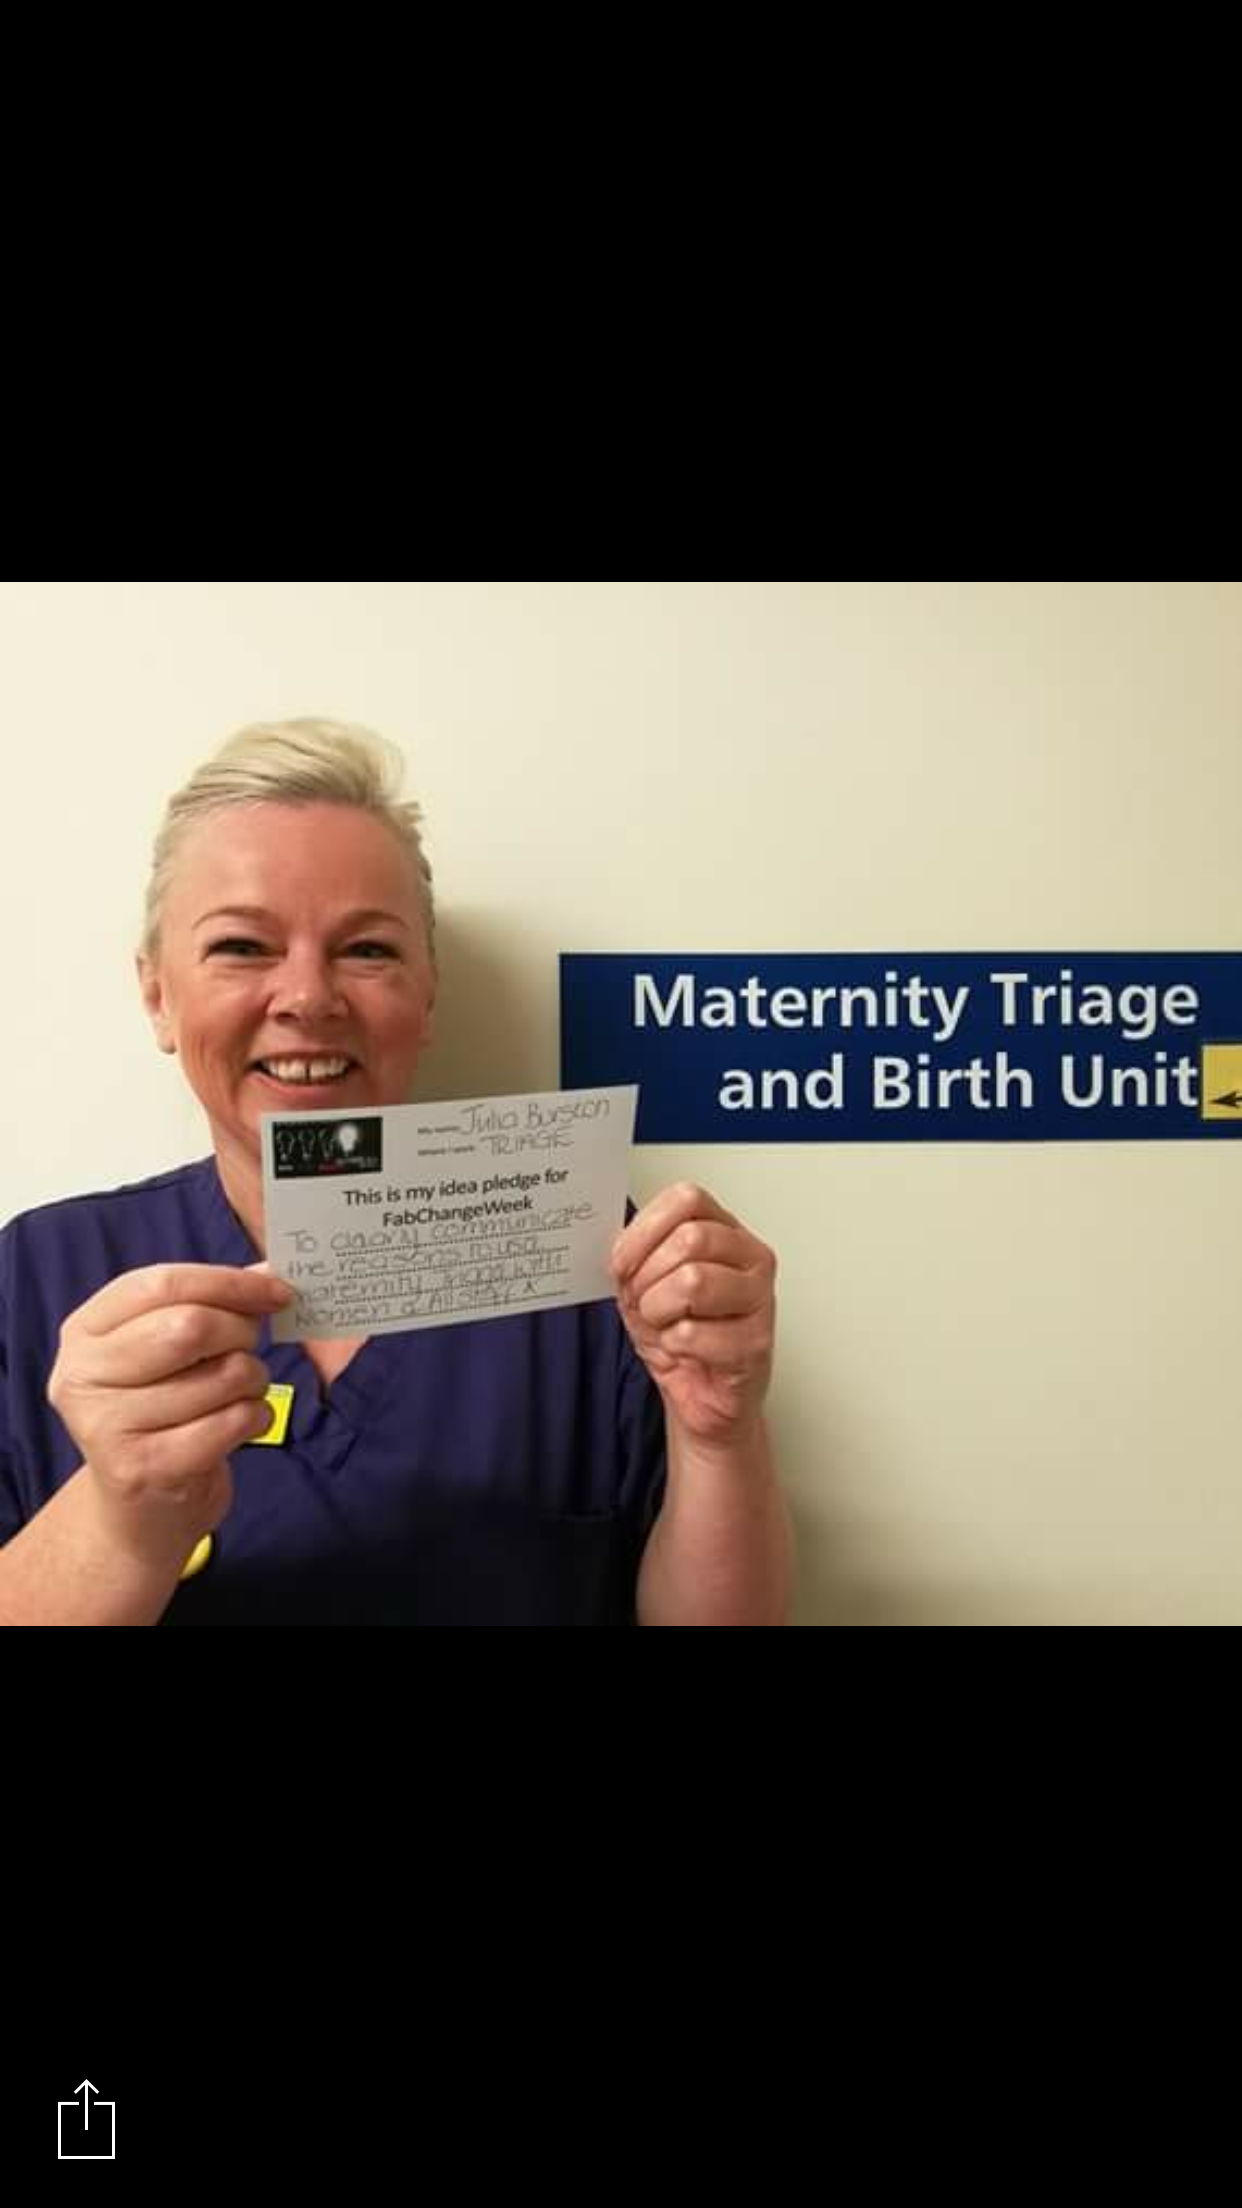 Maternity triage featured image